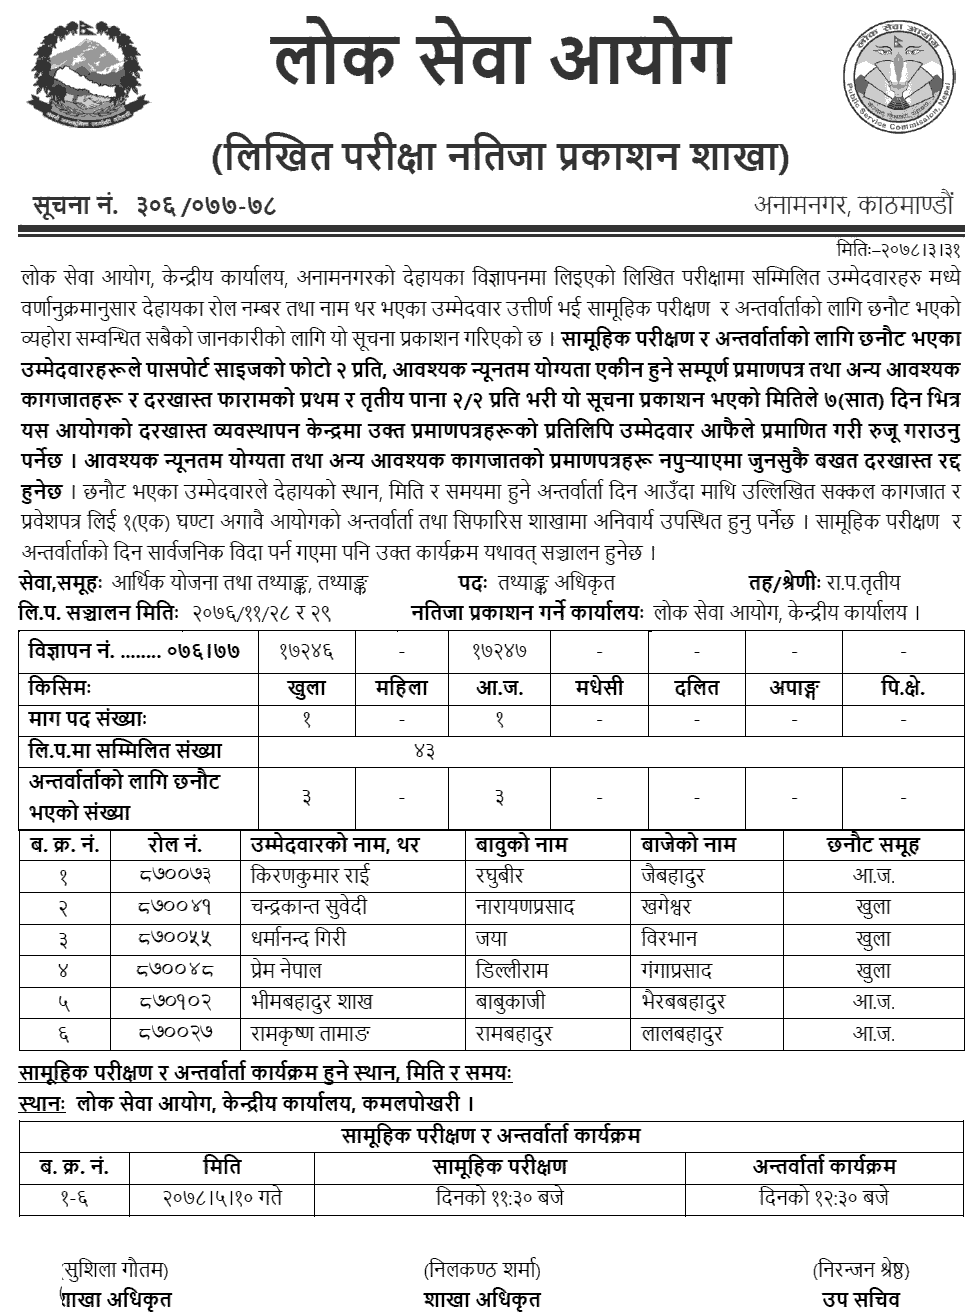 Lok Sewa Aayog Published Written Exam Result of Engineer and Statistics Officer